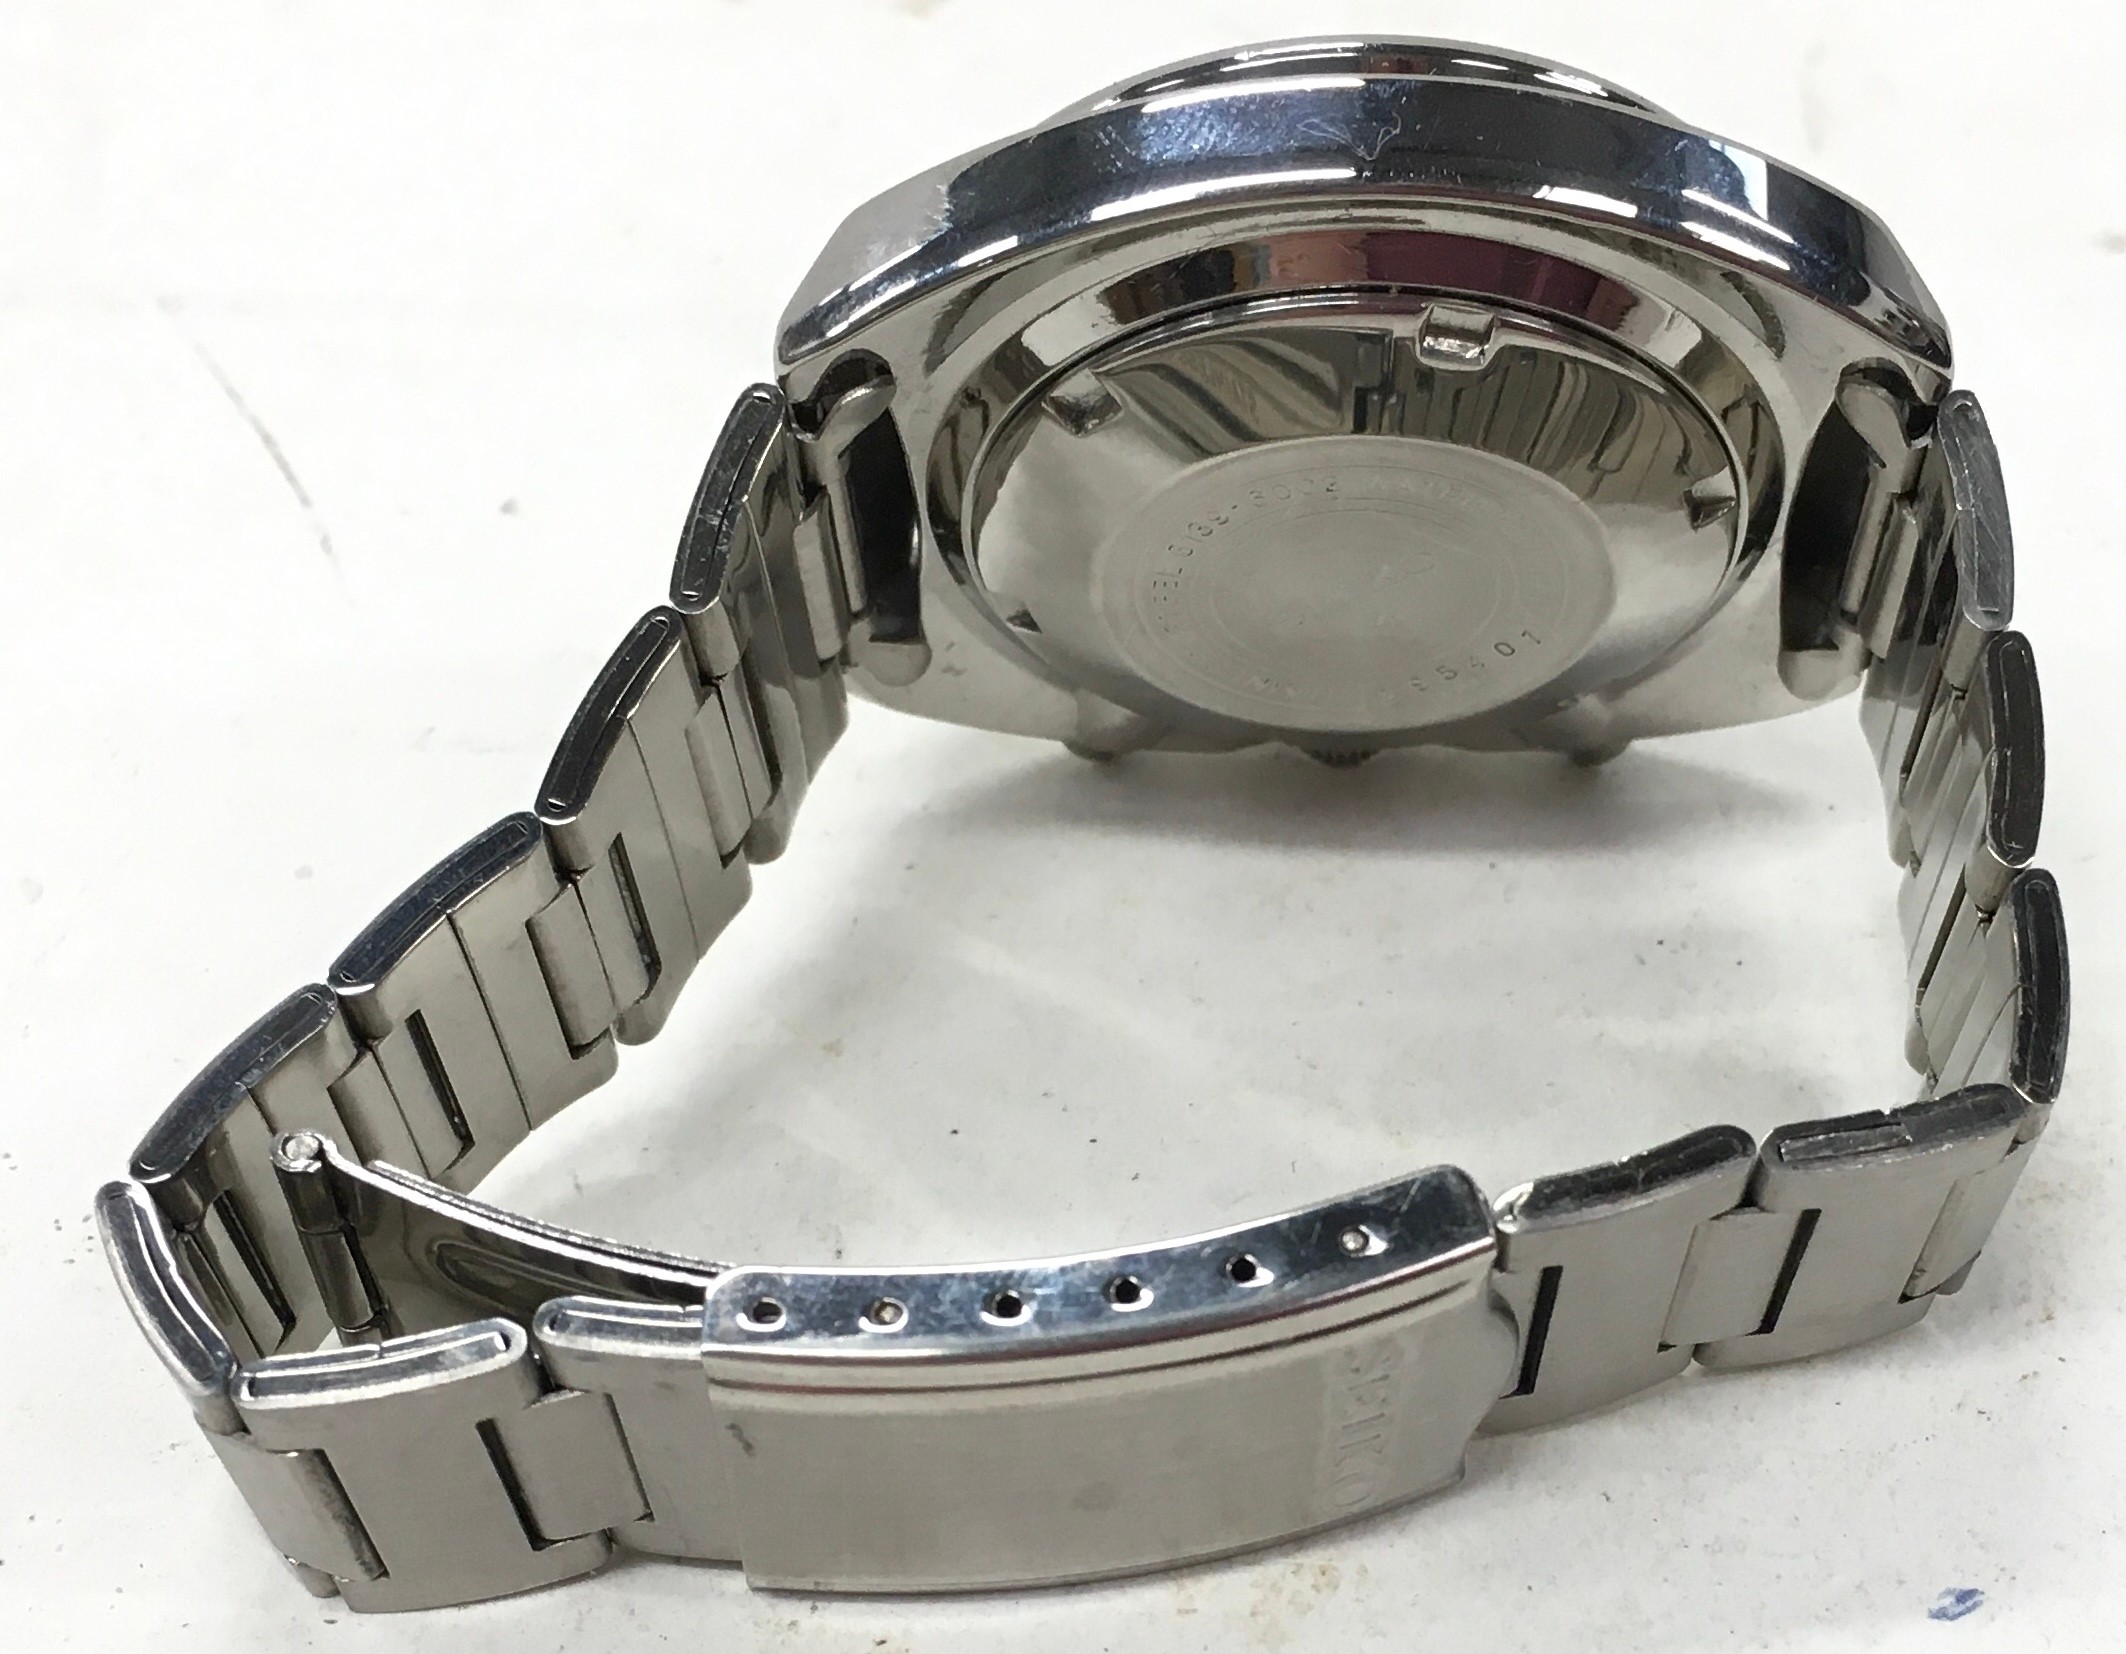 Vintage Seiko 'Silver Pogue' gents automatic watch with Pepsi bezel. Model number 6139-6002. - Image 4 of 4